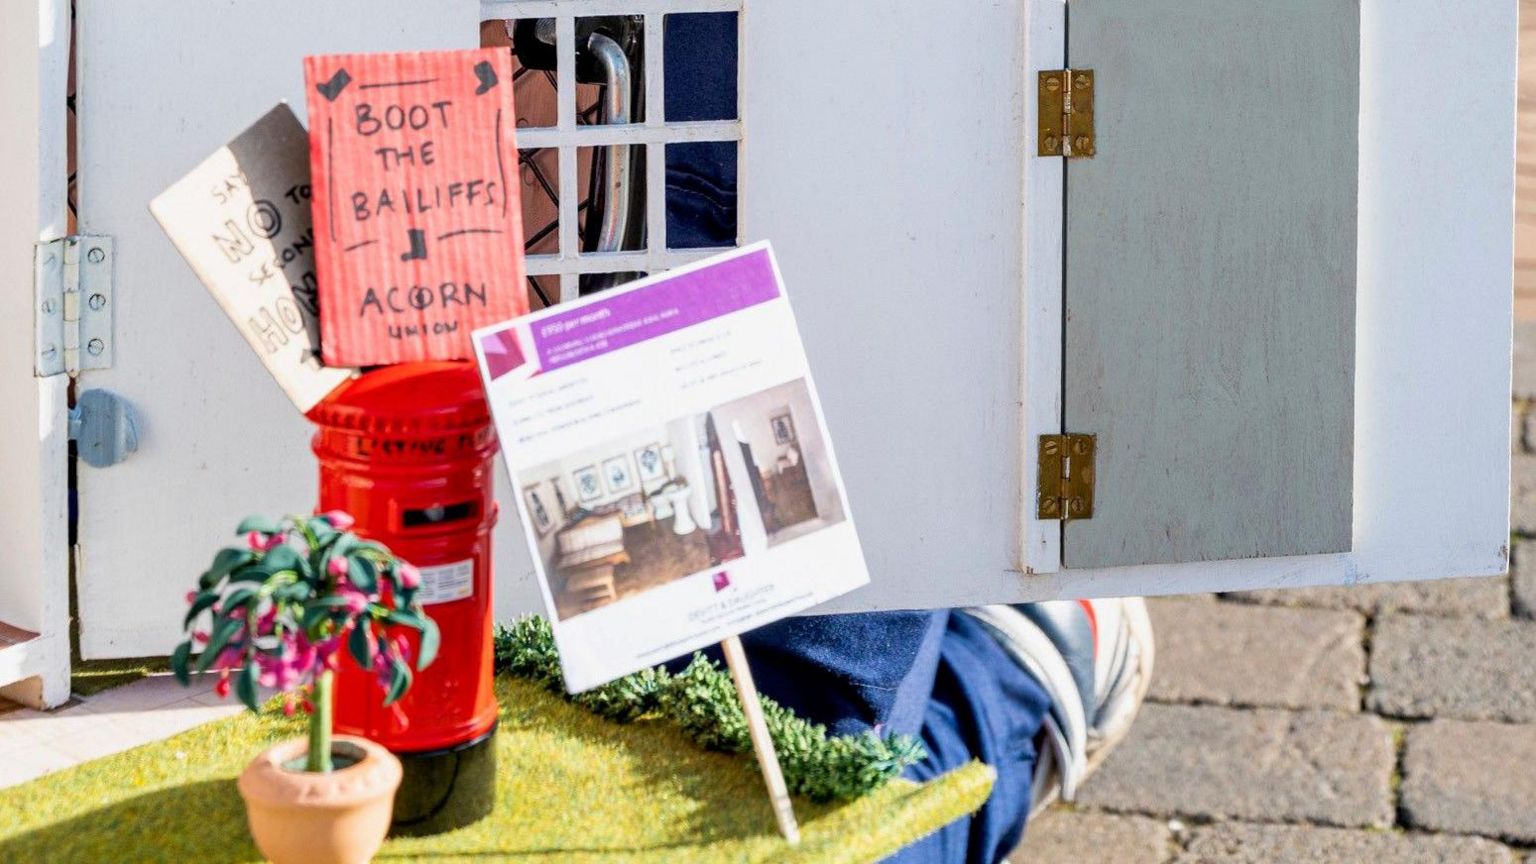 A close up of Bryony Devitt's doll's house with protest signs